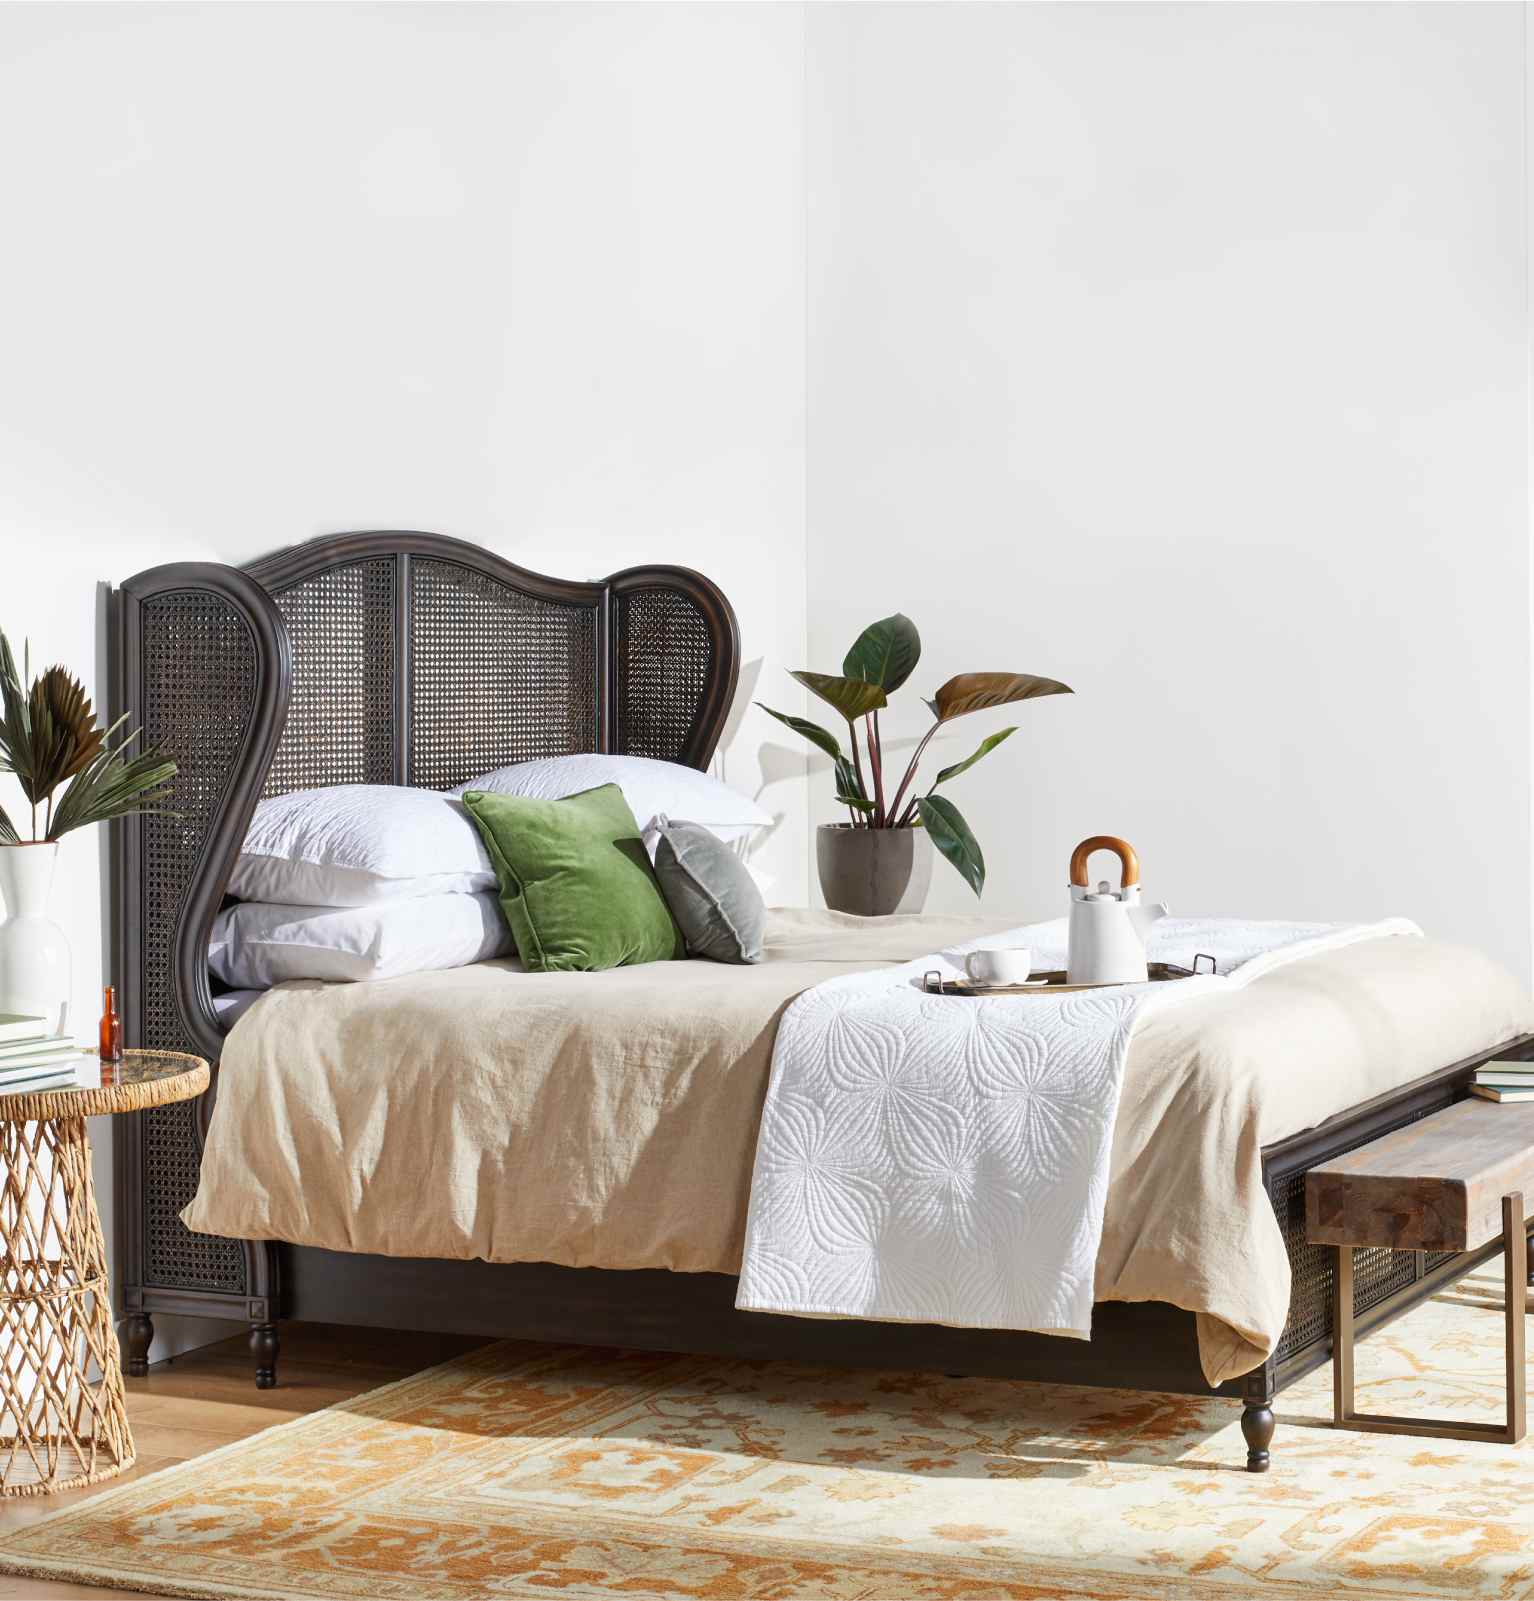 A made-up bed with a winged wicker headboard and a tray with tea on top available online at Overstock